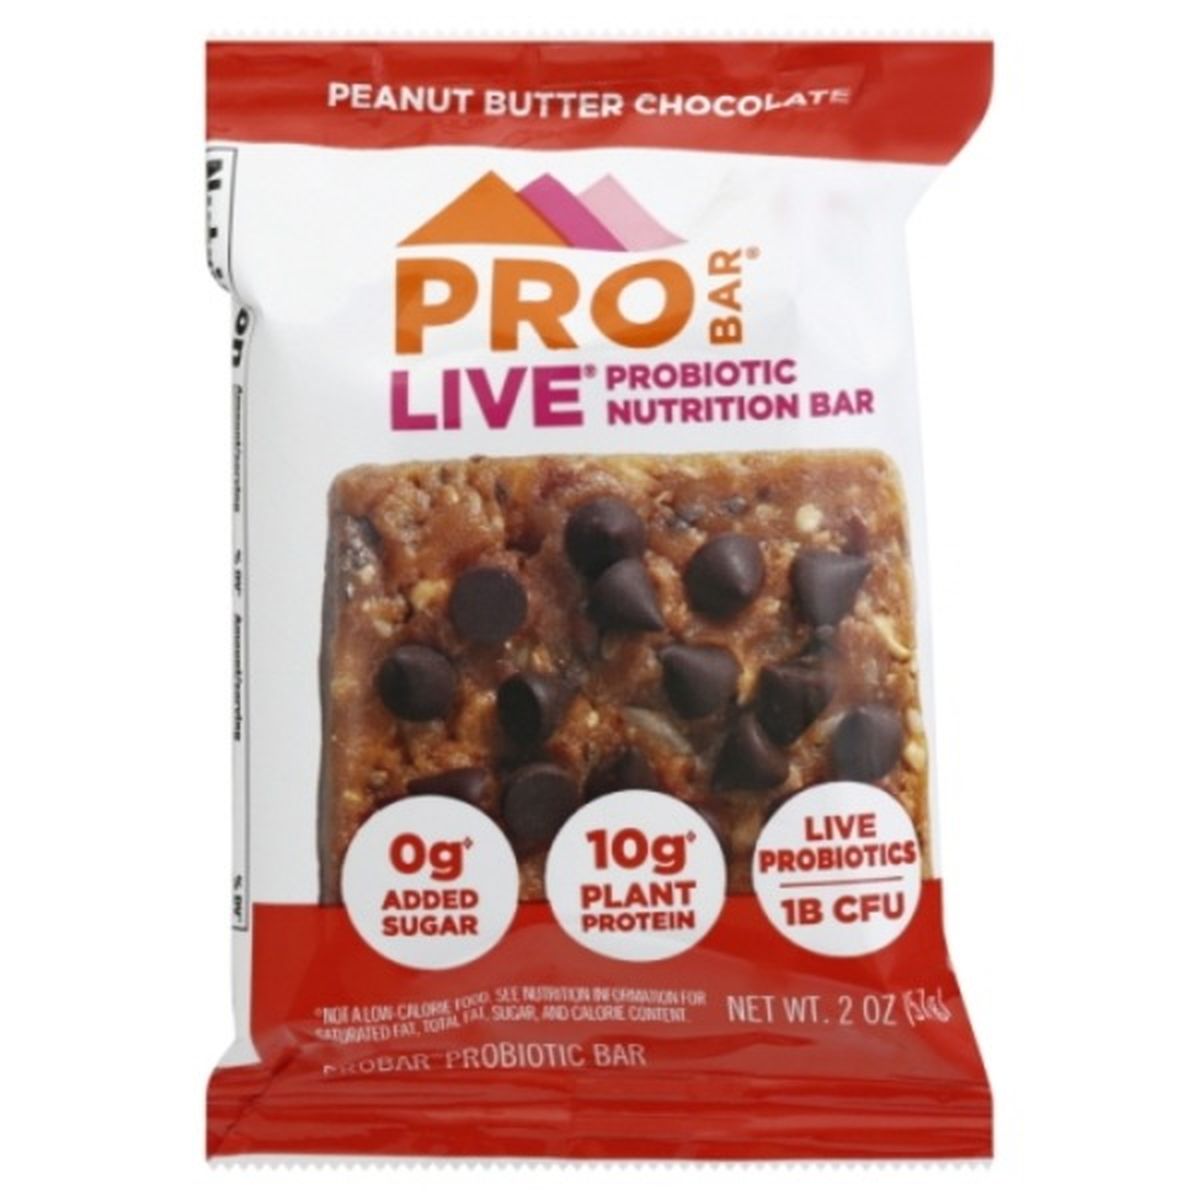 Calories in PROBAR Live Nutrition Bar, Live Probiotic, Peanut Butter Chocolate